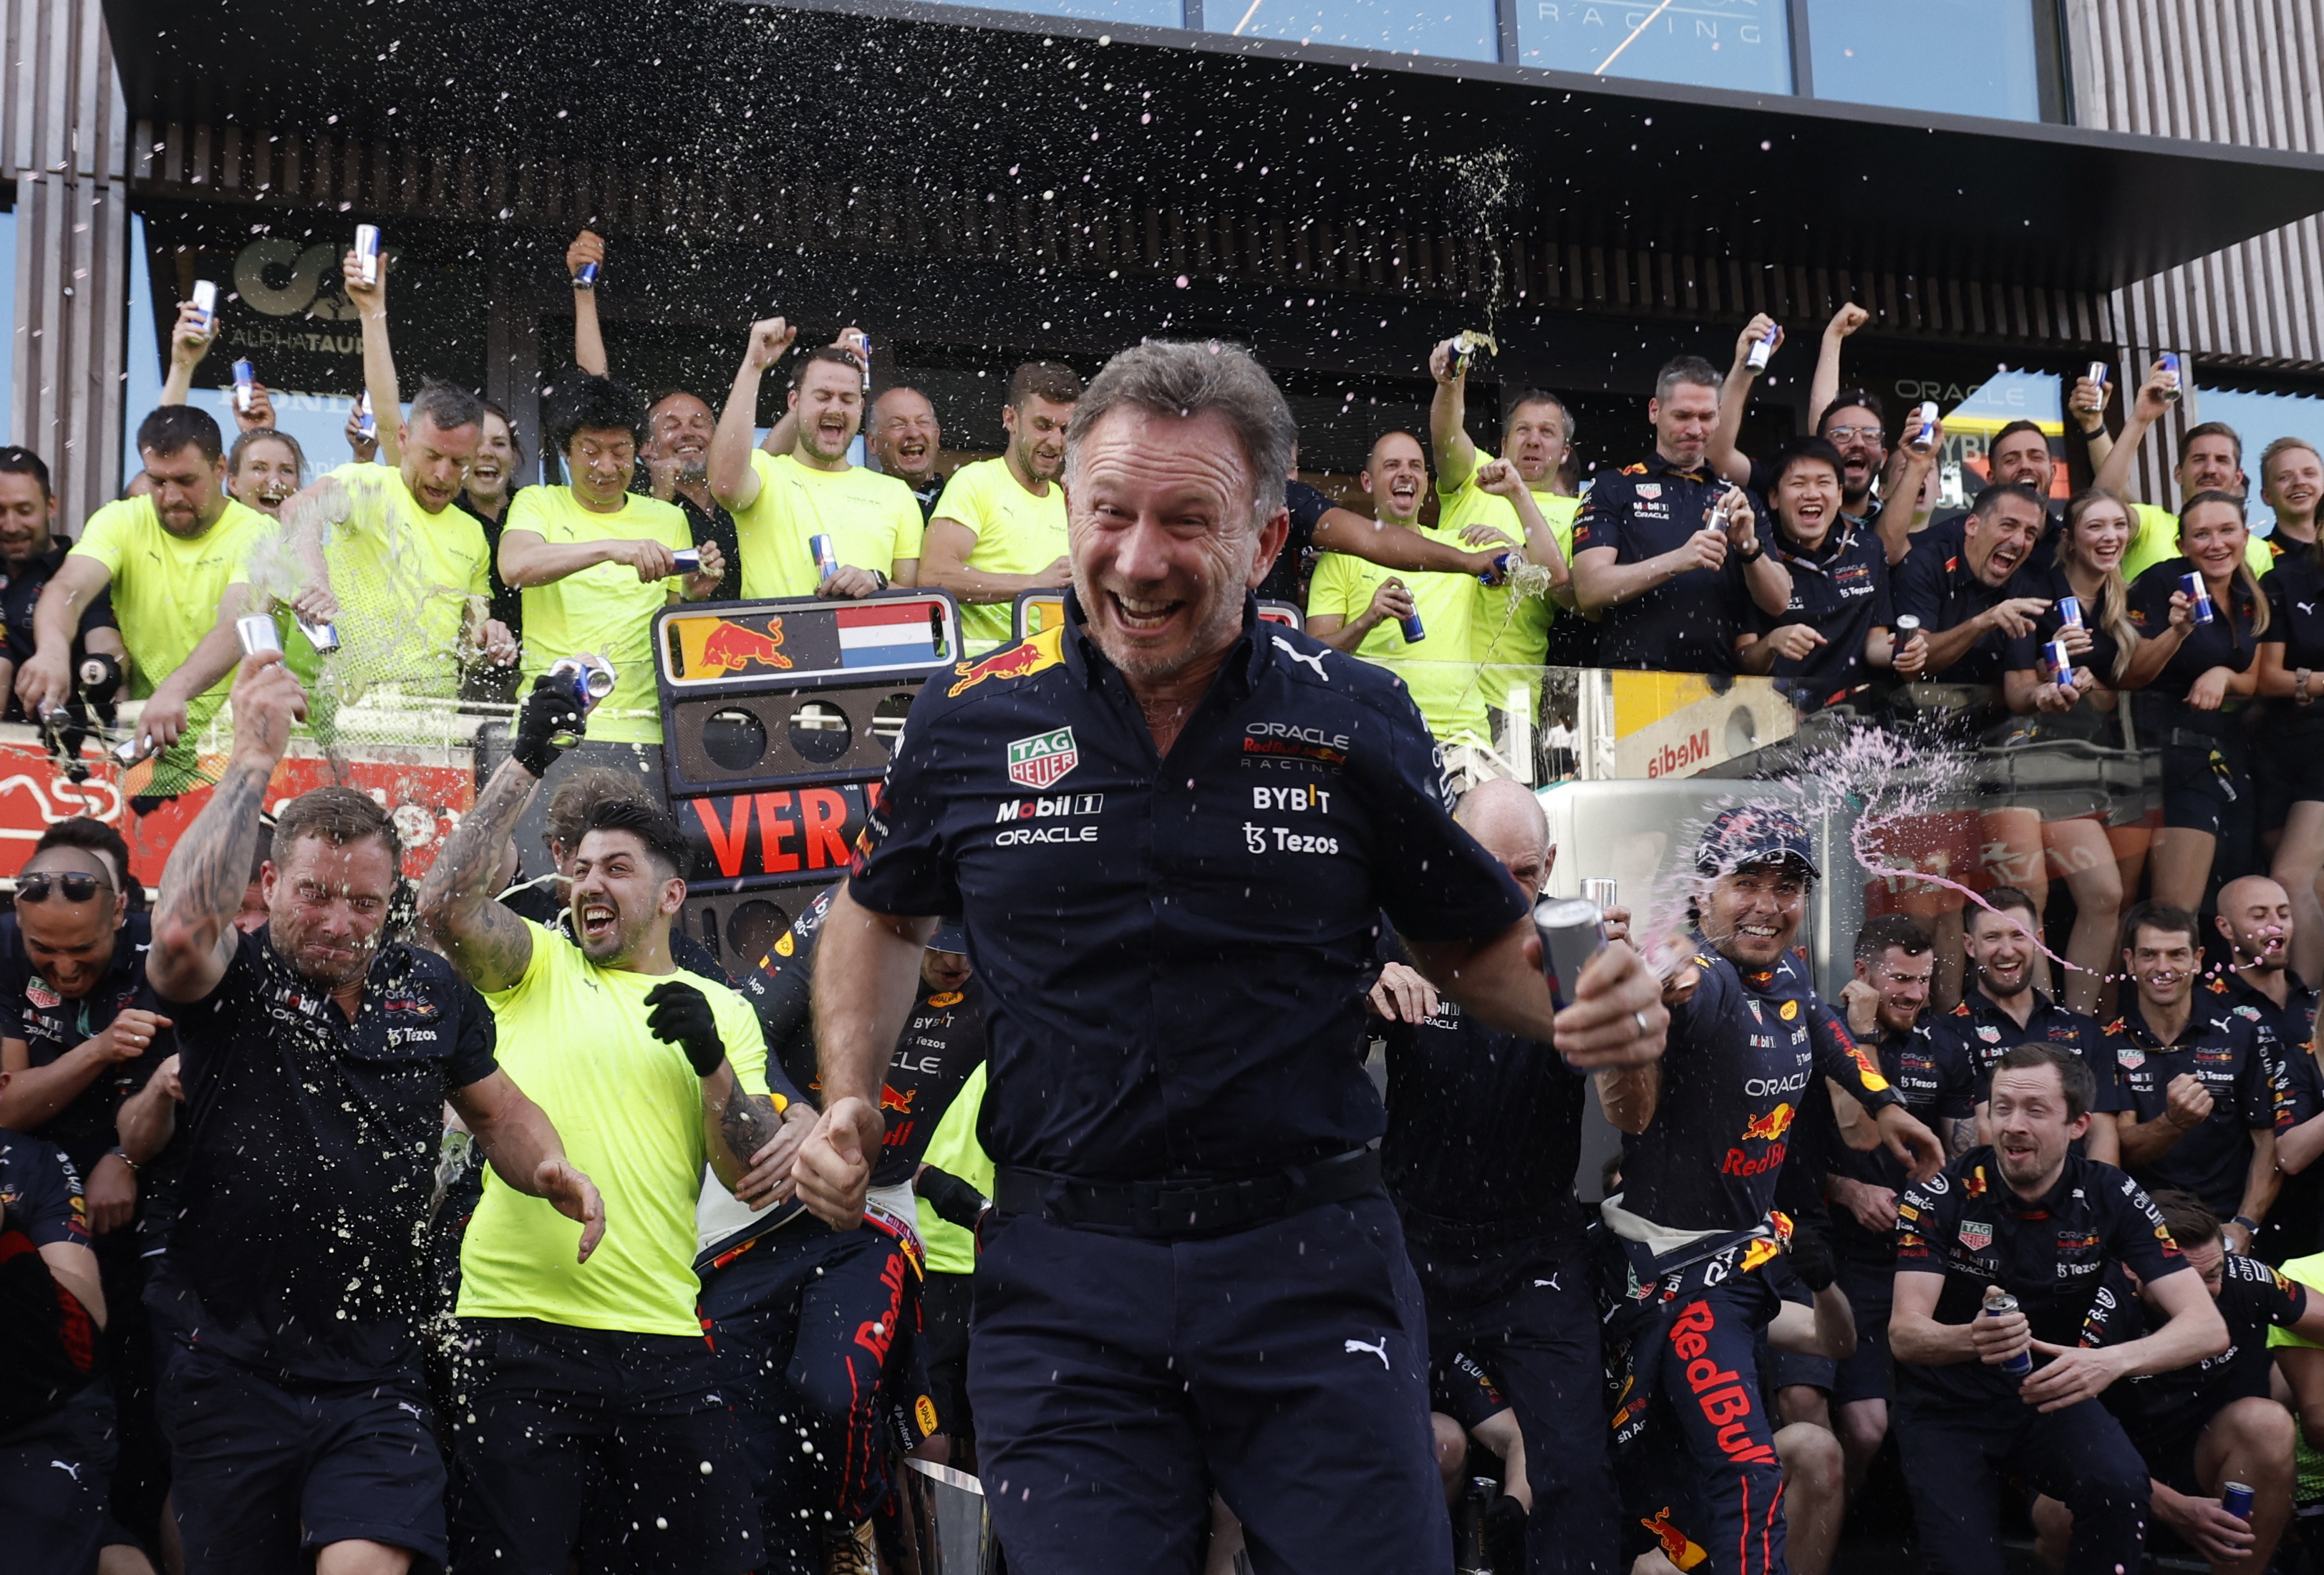 Formula One F1 - Spanish Grand Prix - Circuit de Barcelona-Catalunya, Barcelona, Spain - May 22, 2022 Team principal Christian Horner celebrates with the Red Bull team after drivers Max Verstappen and Sergio Perez finish in first and second place REUTERS/Albert Gea